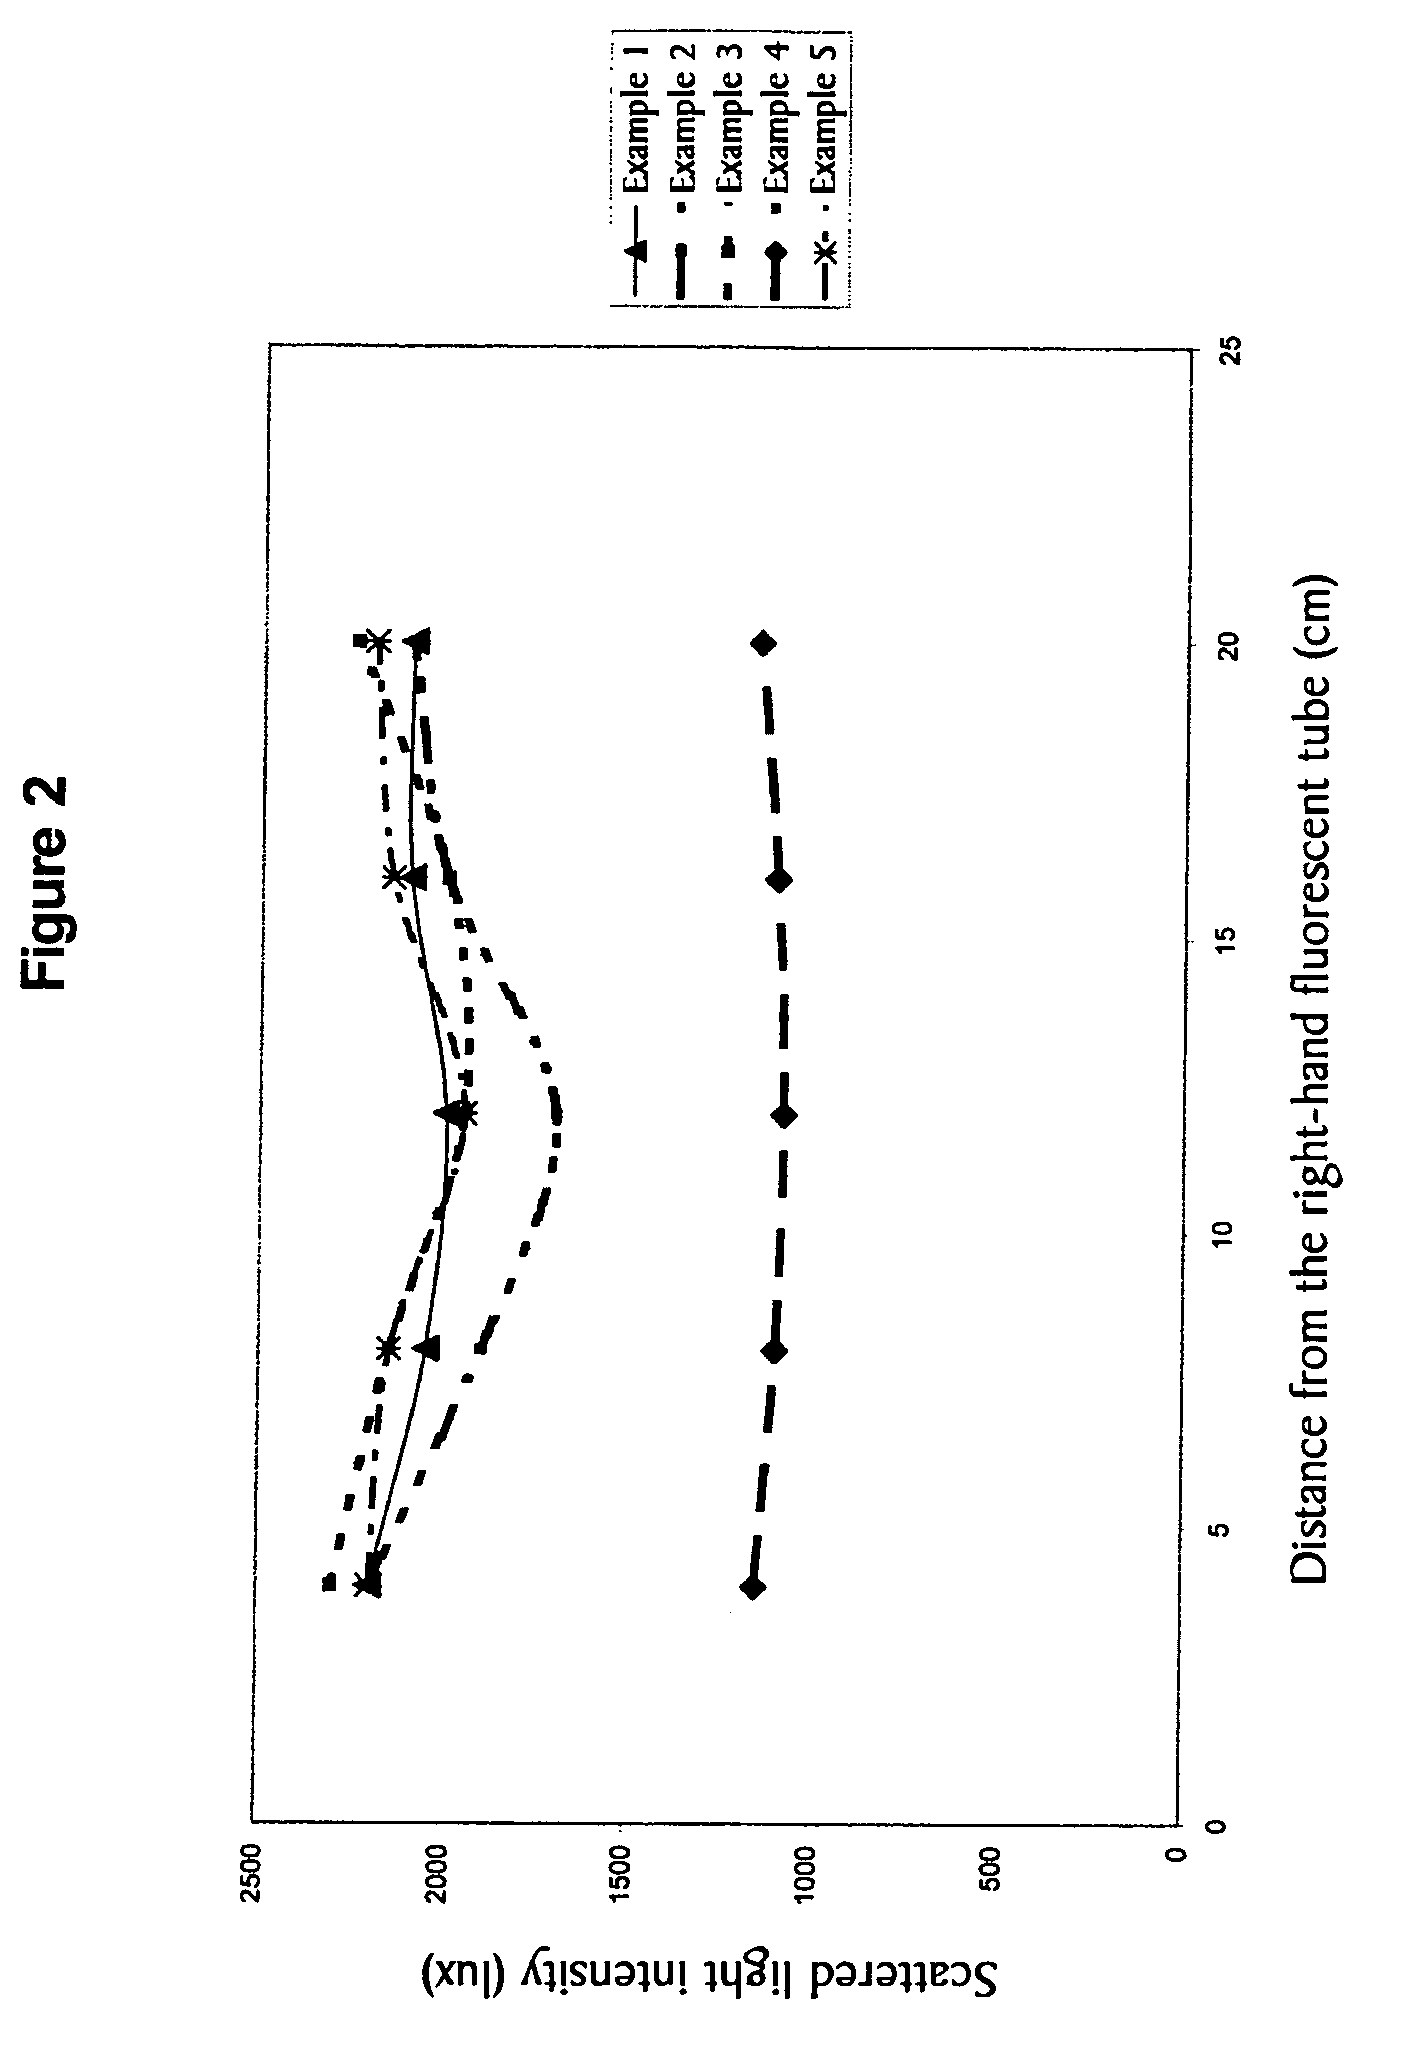 Transparent thermoplastic composition comprising hollow glass beads